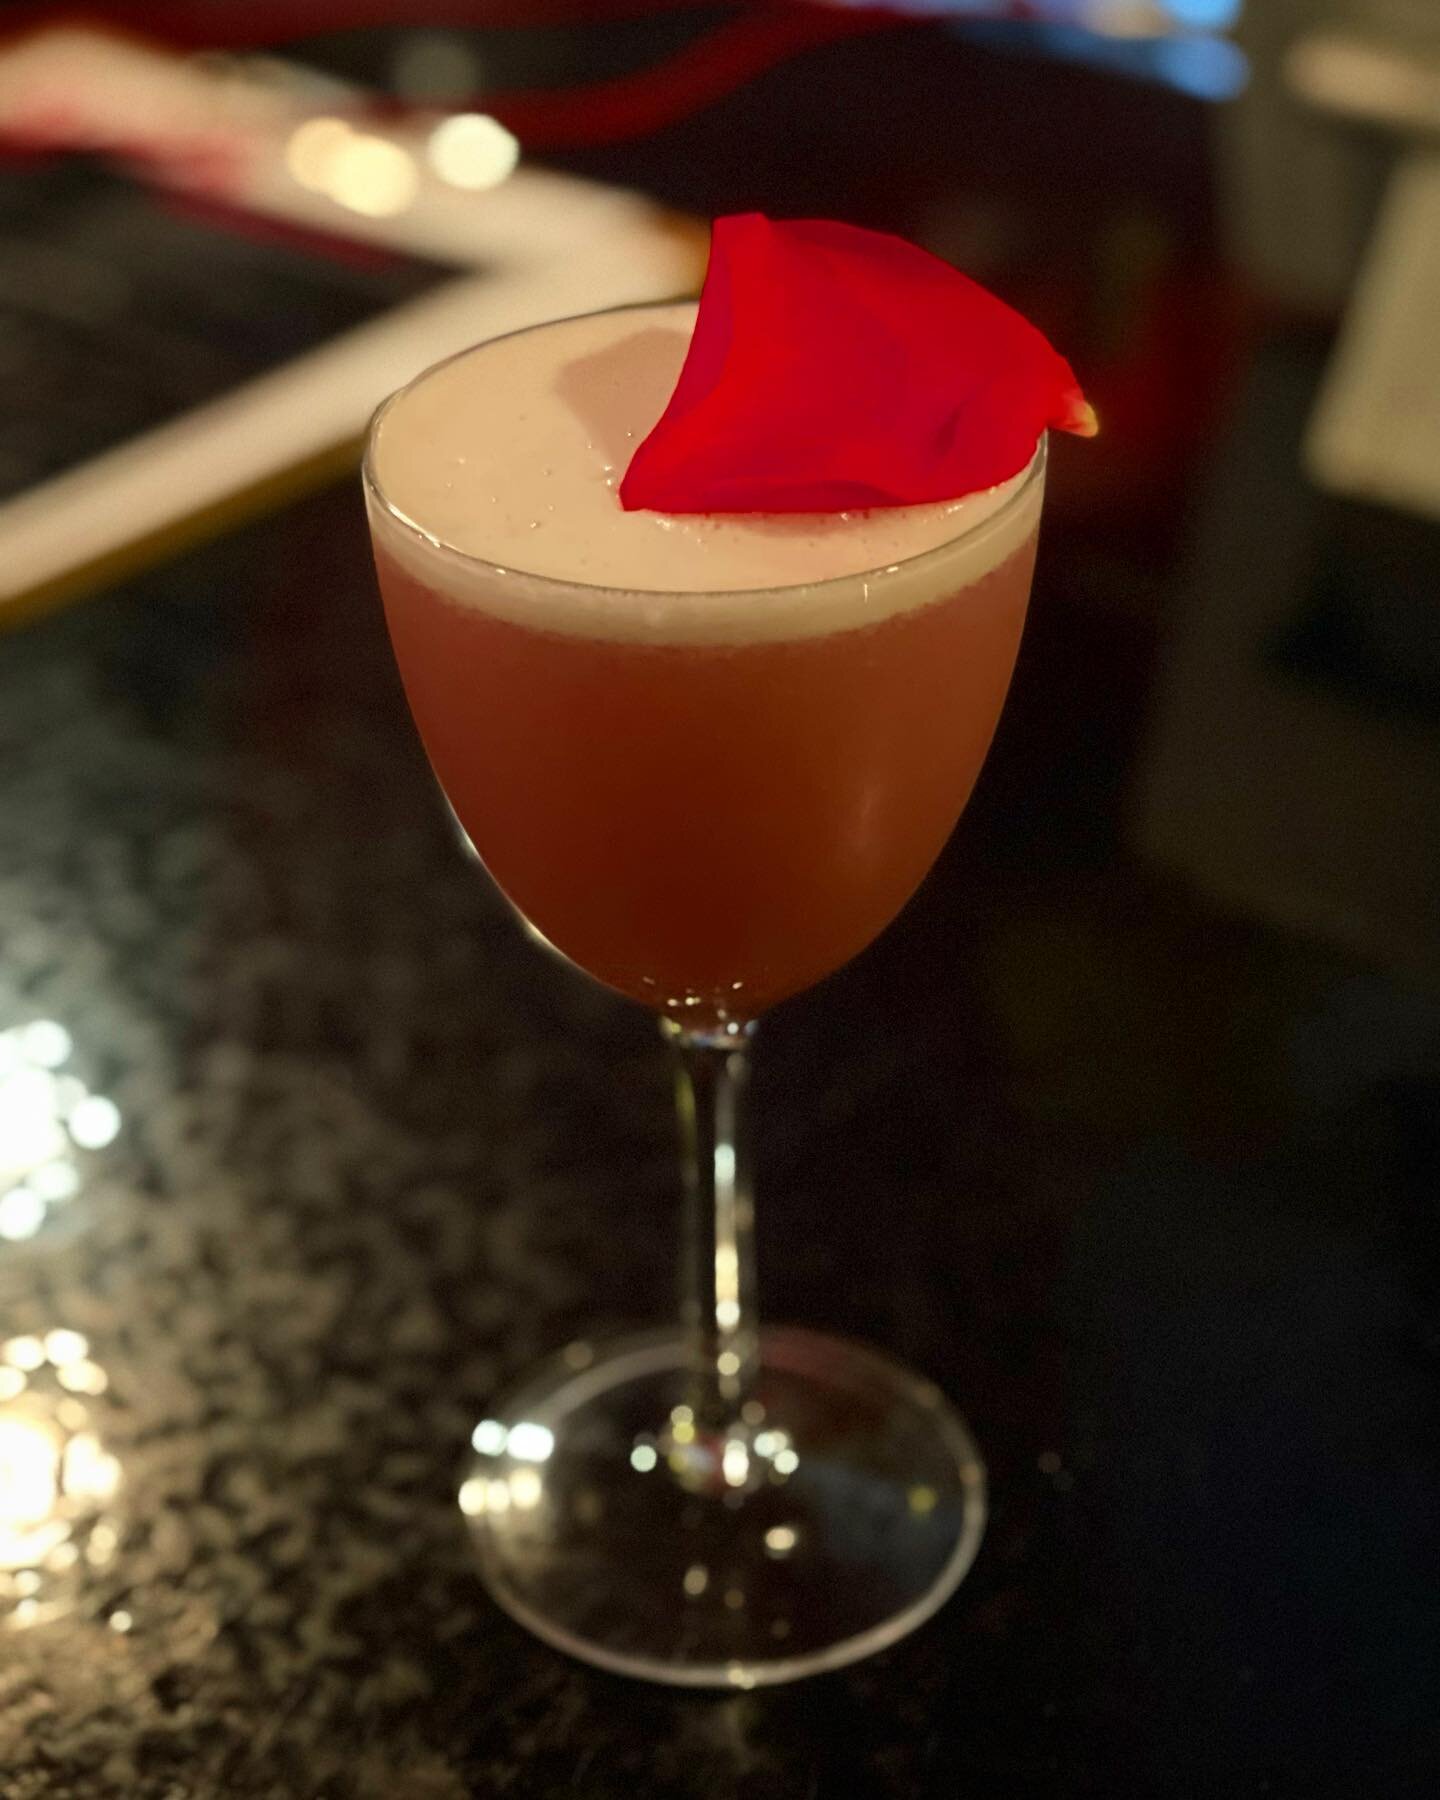 INTRODUCING THE:
 💋LOVE POTION 69 💋
VALENTINES DAY COCKTAIL!
⠀
🥰💕 Celebrate your day of looove with this rose petal infused cocktail🥰💕
⠀
⠀
#slashrun
#valentinesday
#valentinescocktails